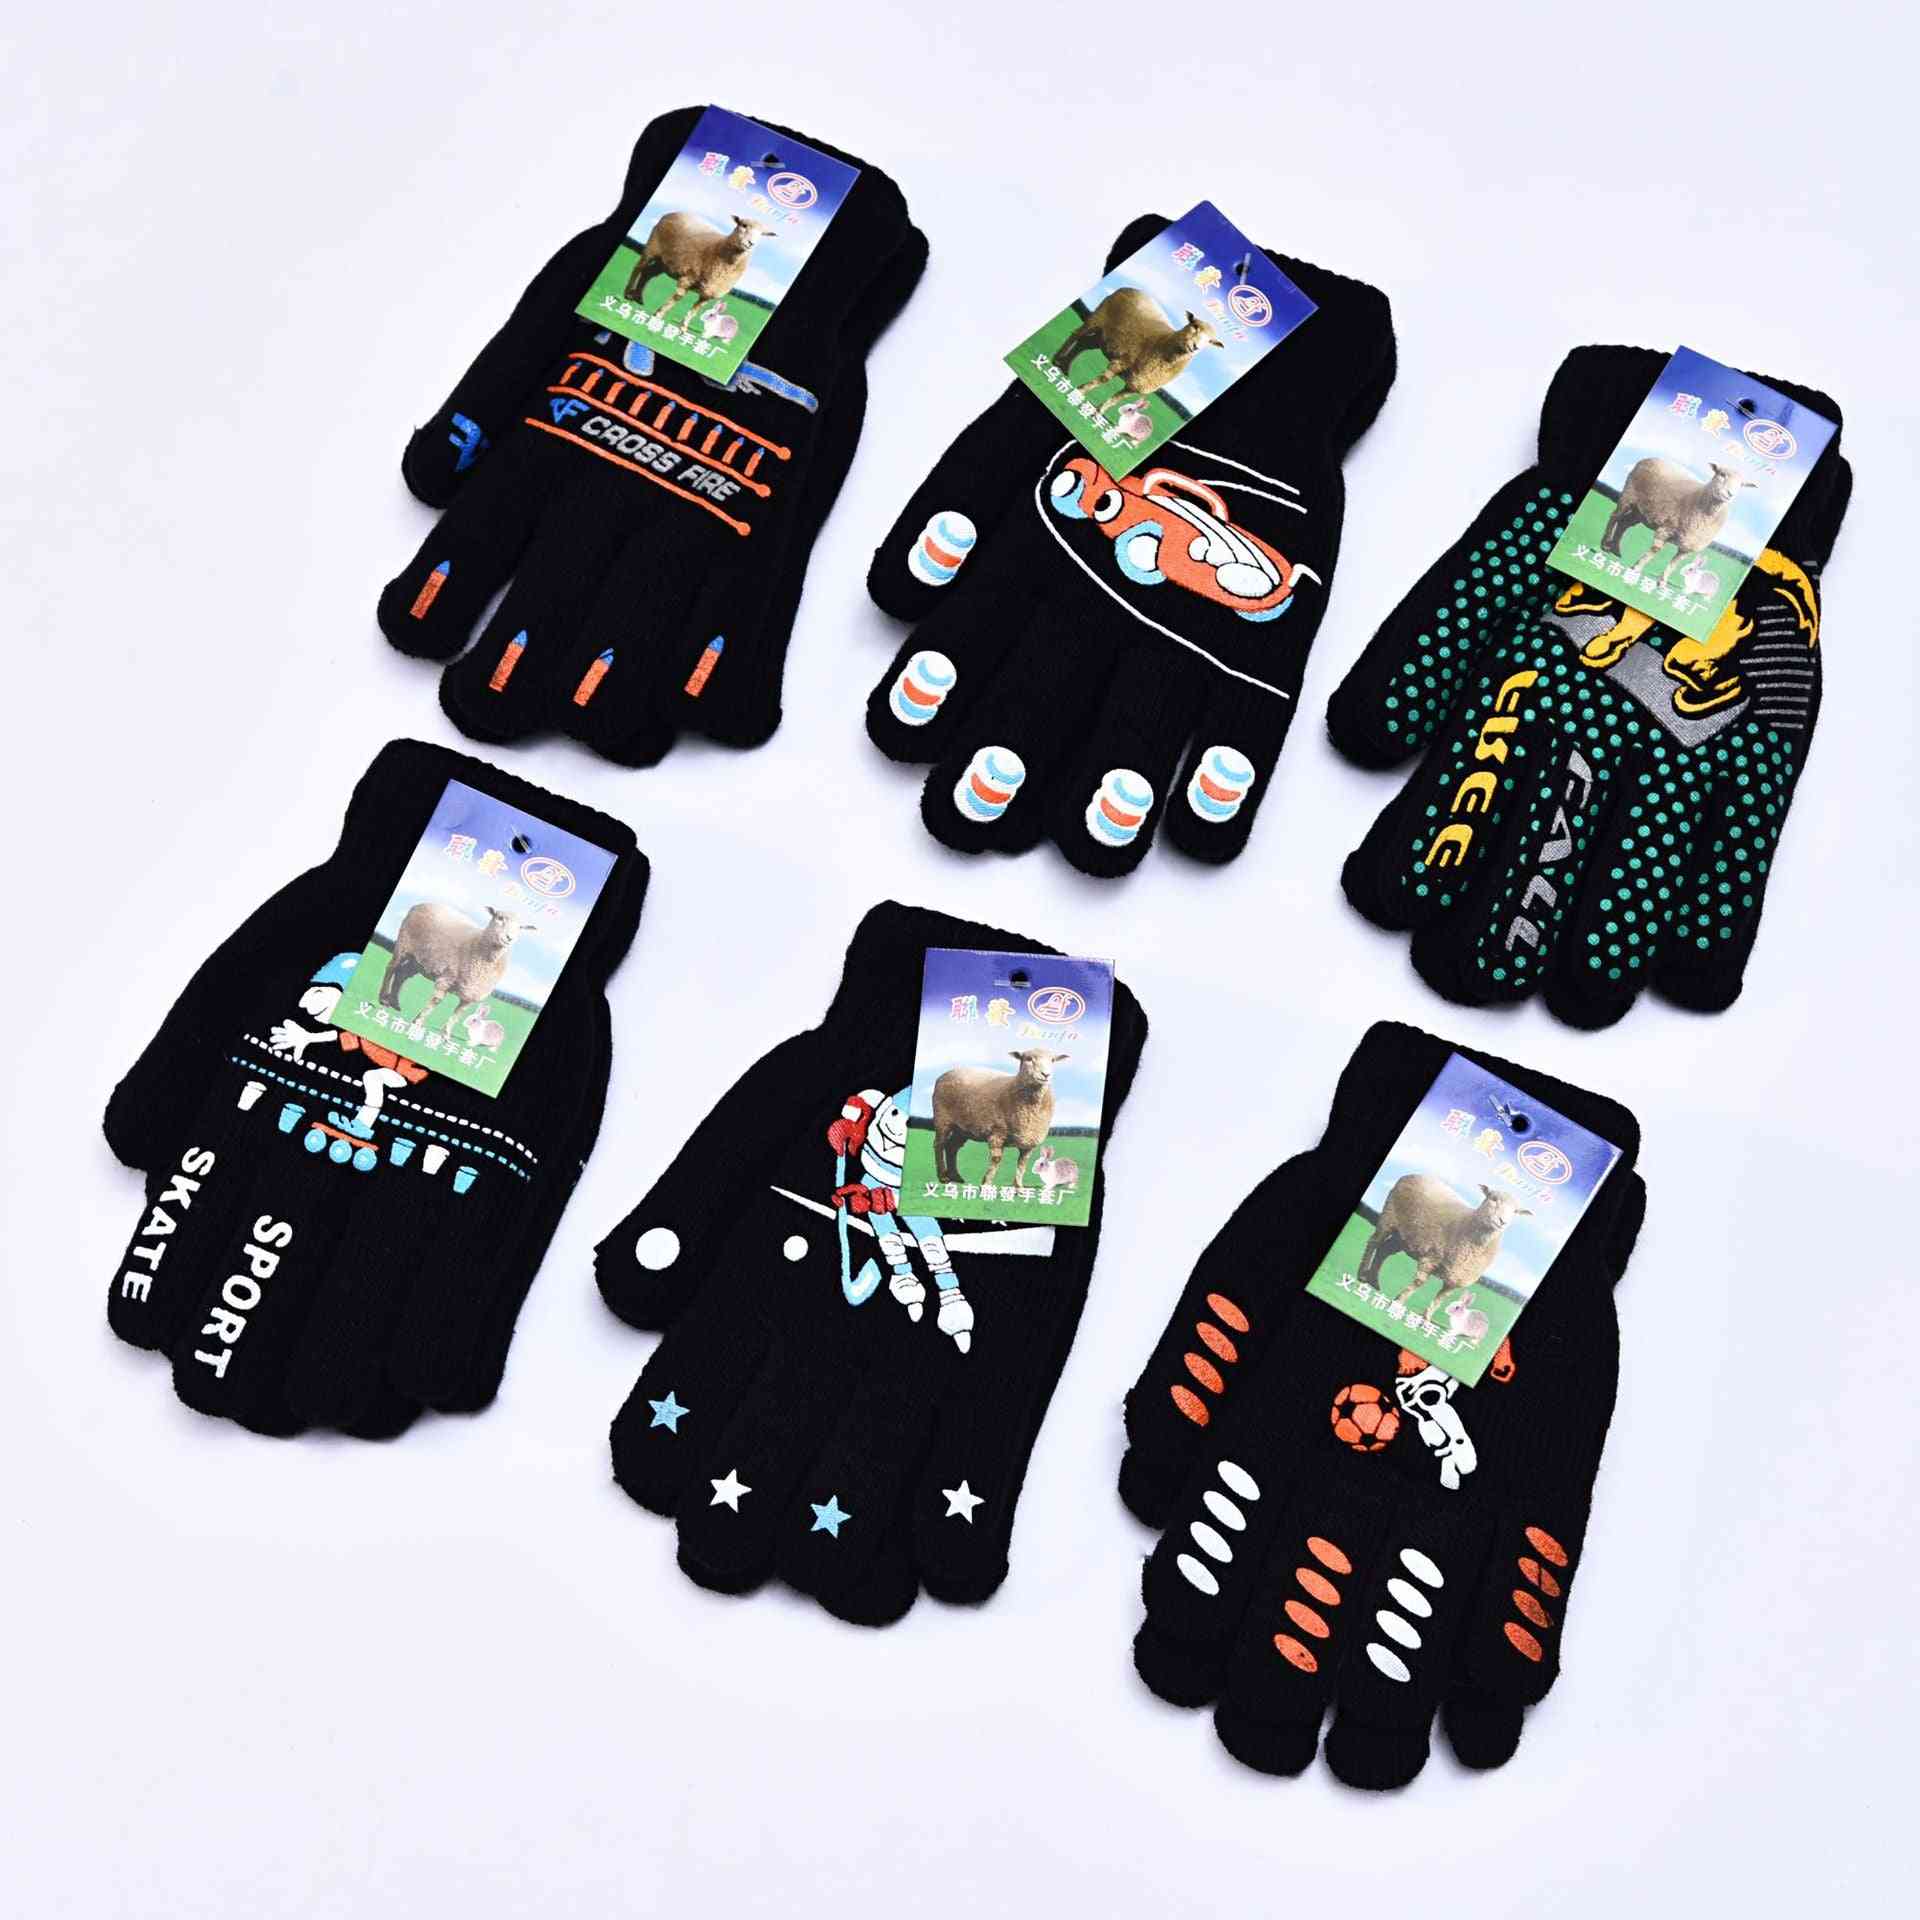 Warm Winter Cycling Autumn Hand Gloves, Mermey Knitted For